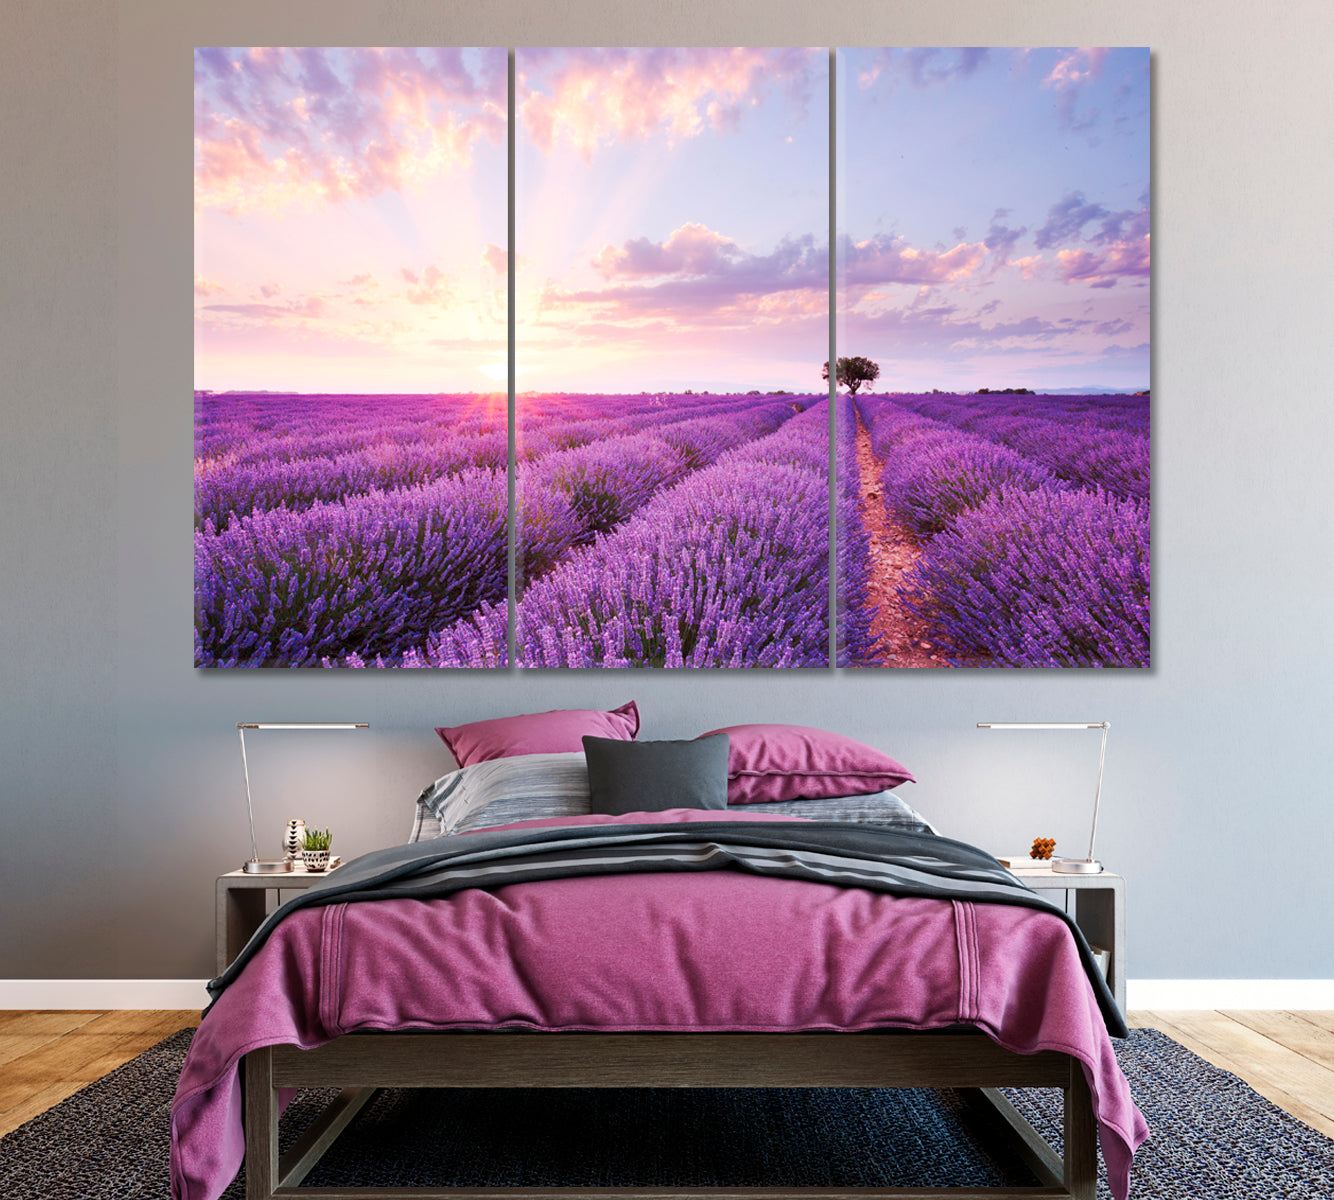 Lavender Field at Sunset Canvas Print ArtLexy 3 Panels 36"x24" inches 